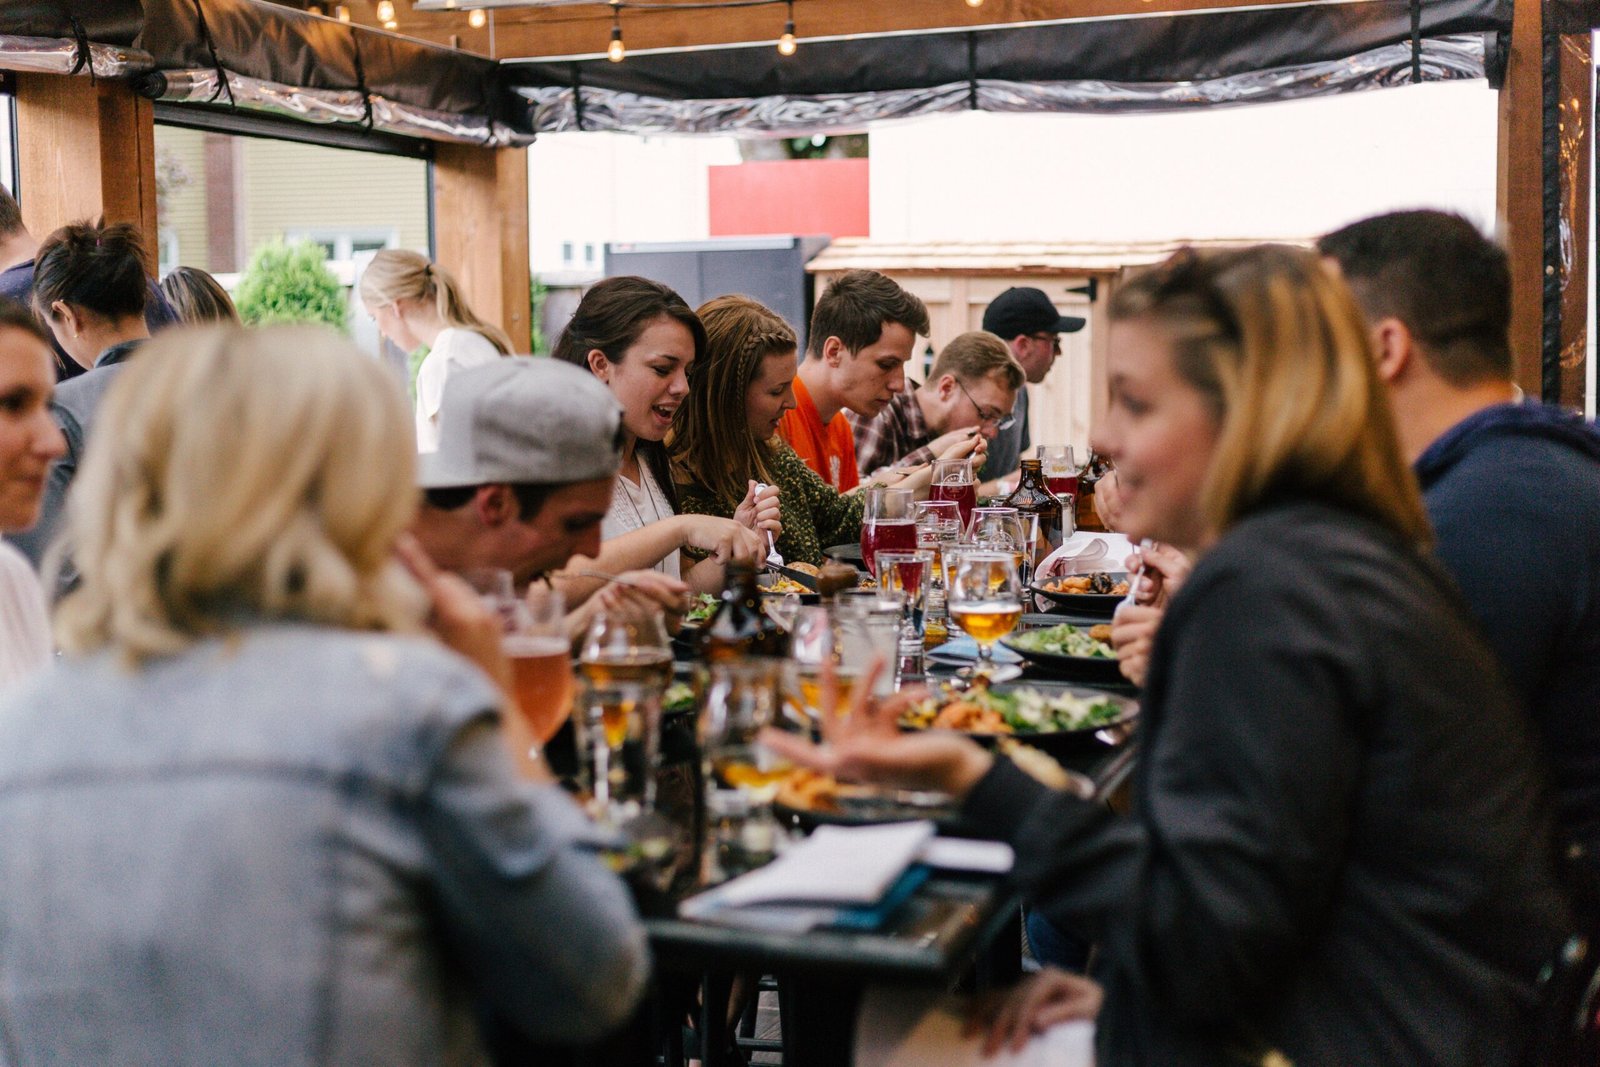 How to Use Marketing for Restaurants and Bars to Attract New Customers